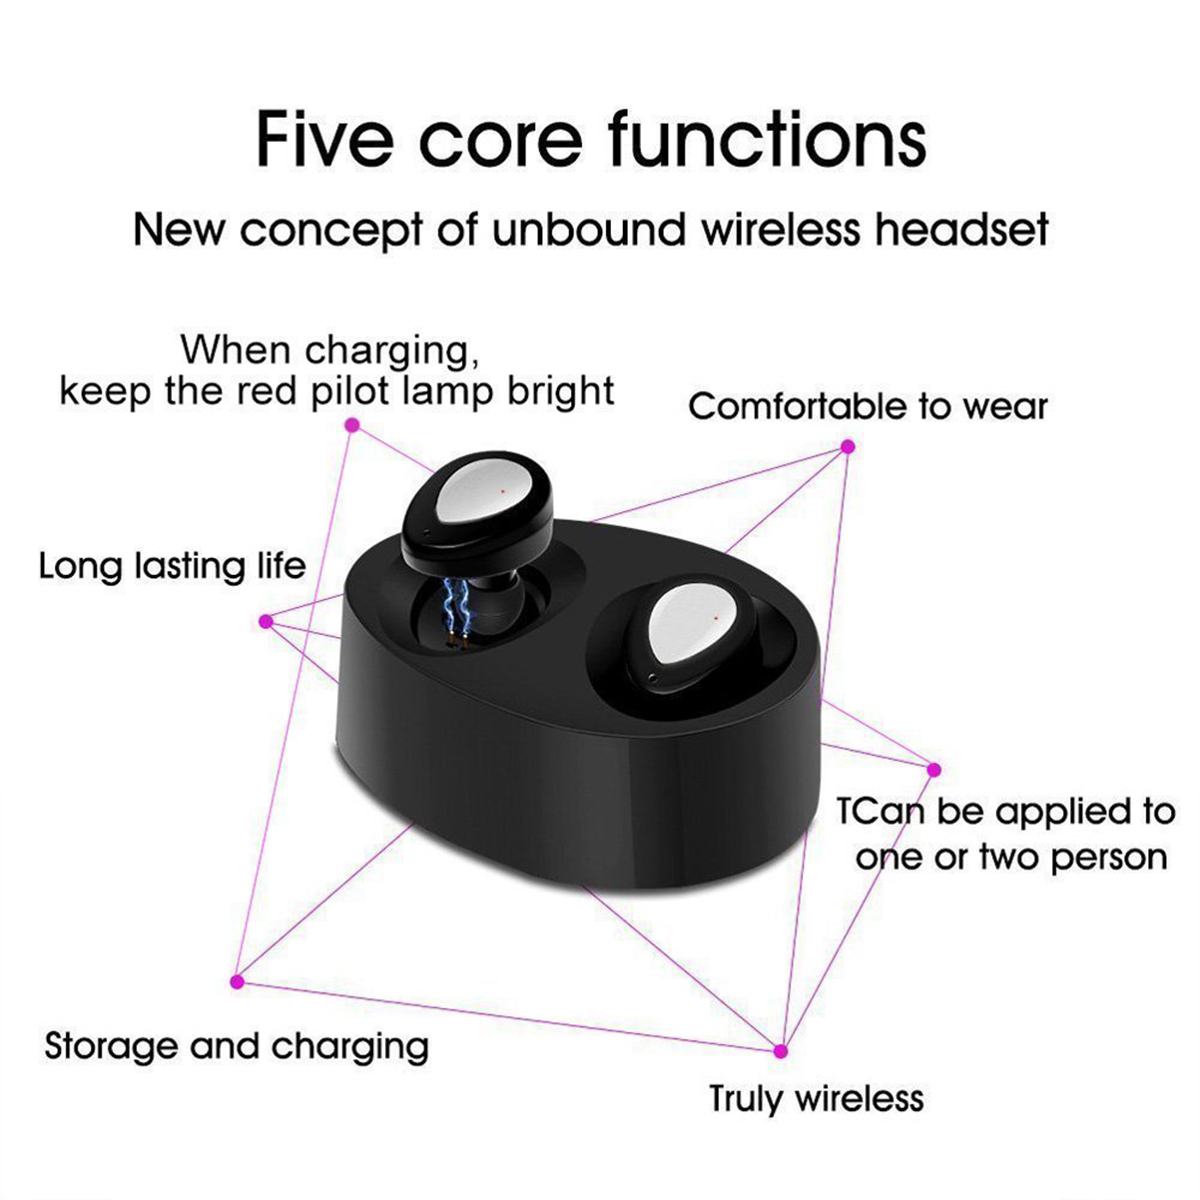 TWS-K2 Wireless bluetooth Headphone Mini Portable Stereo Earphone Earbuds with Mic with Charging Box